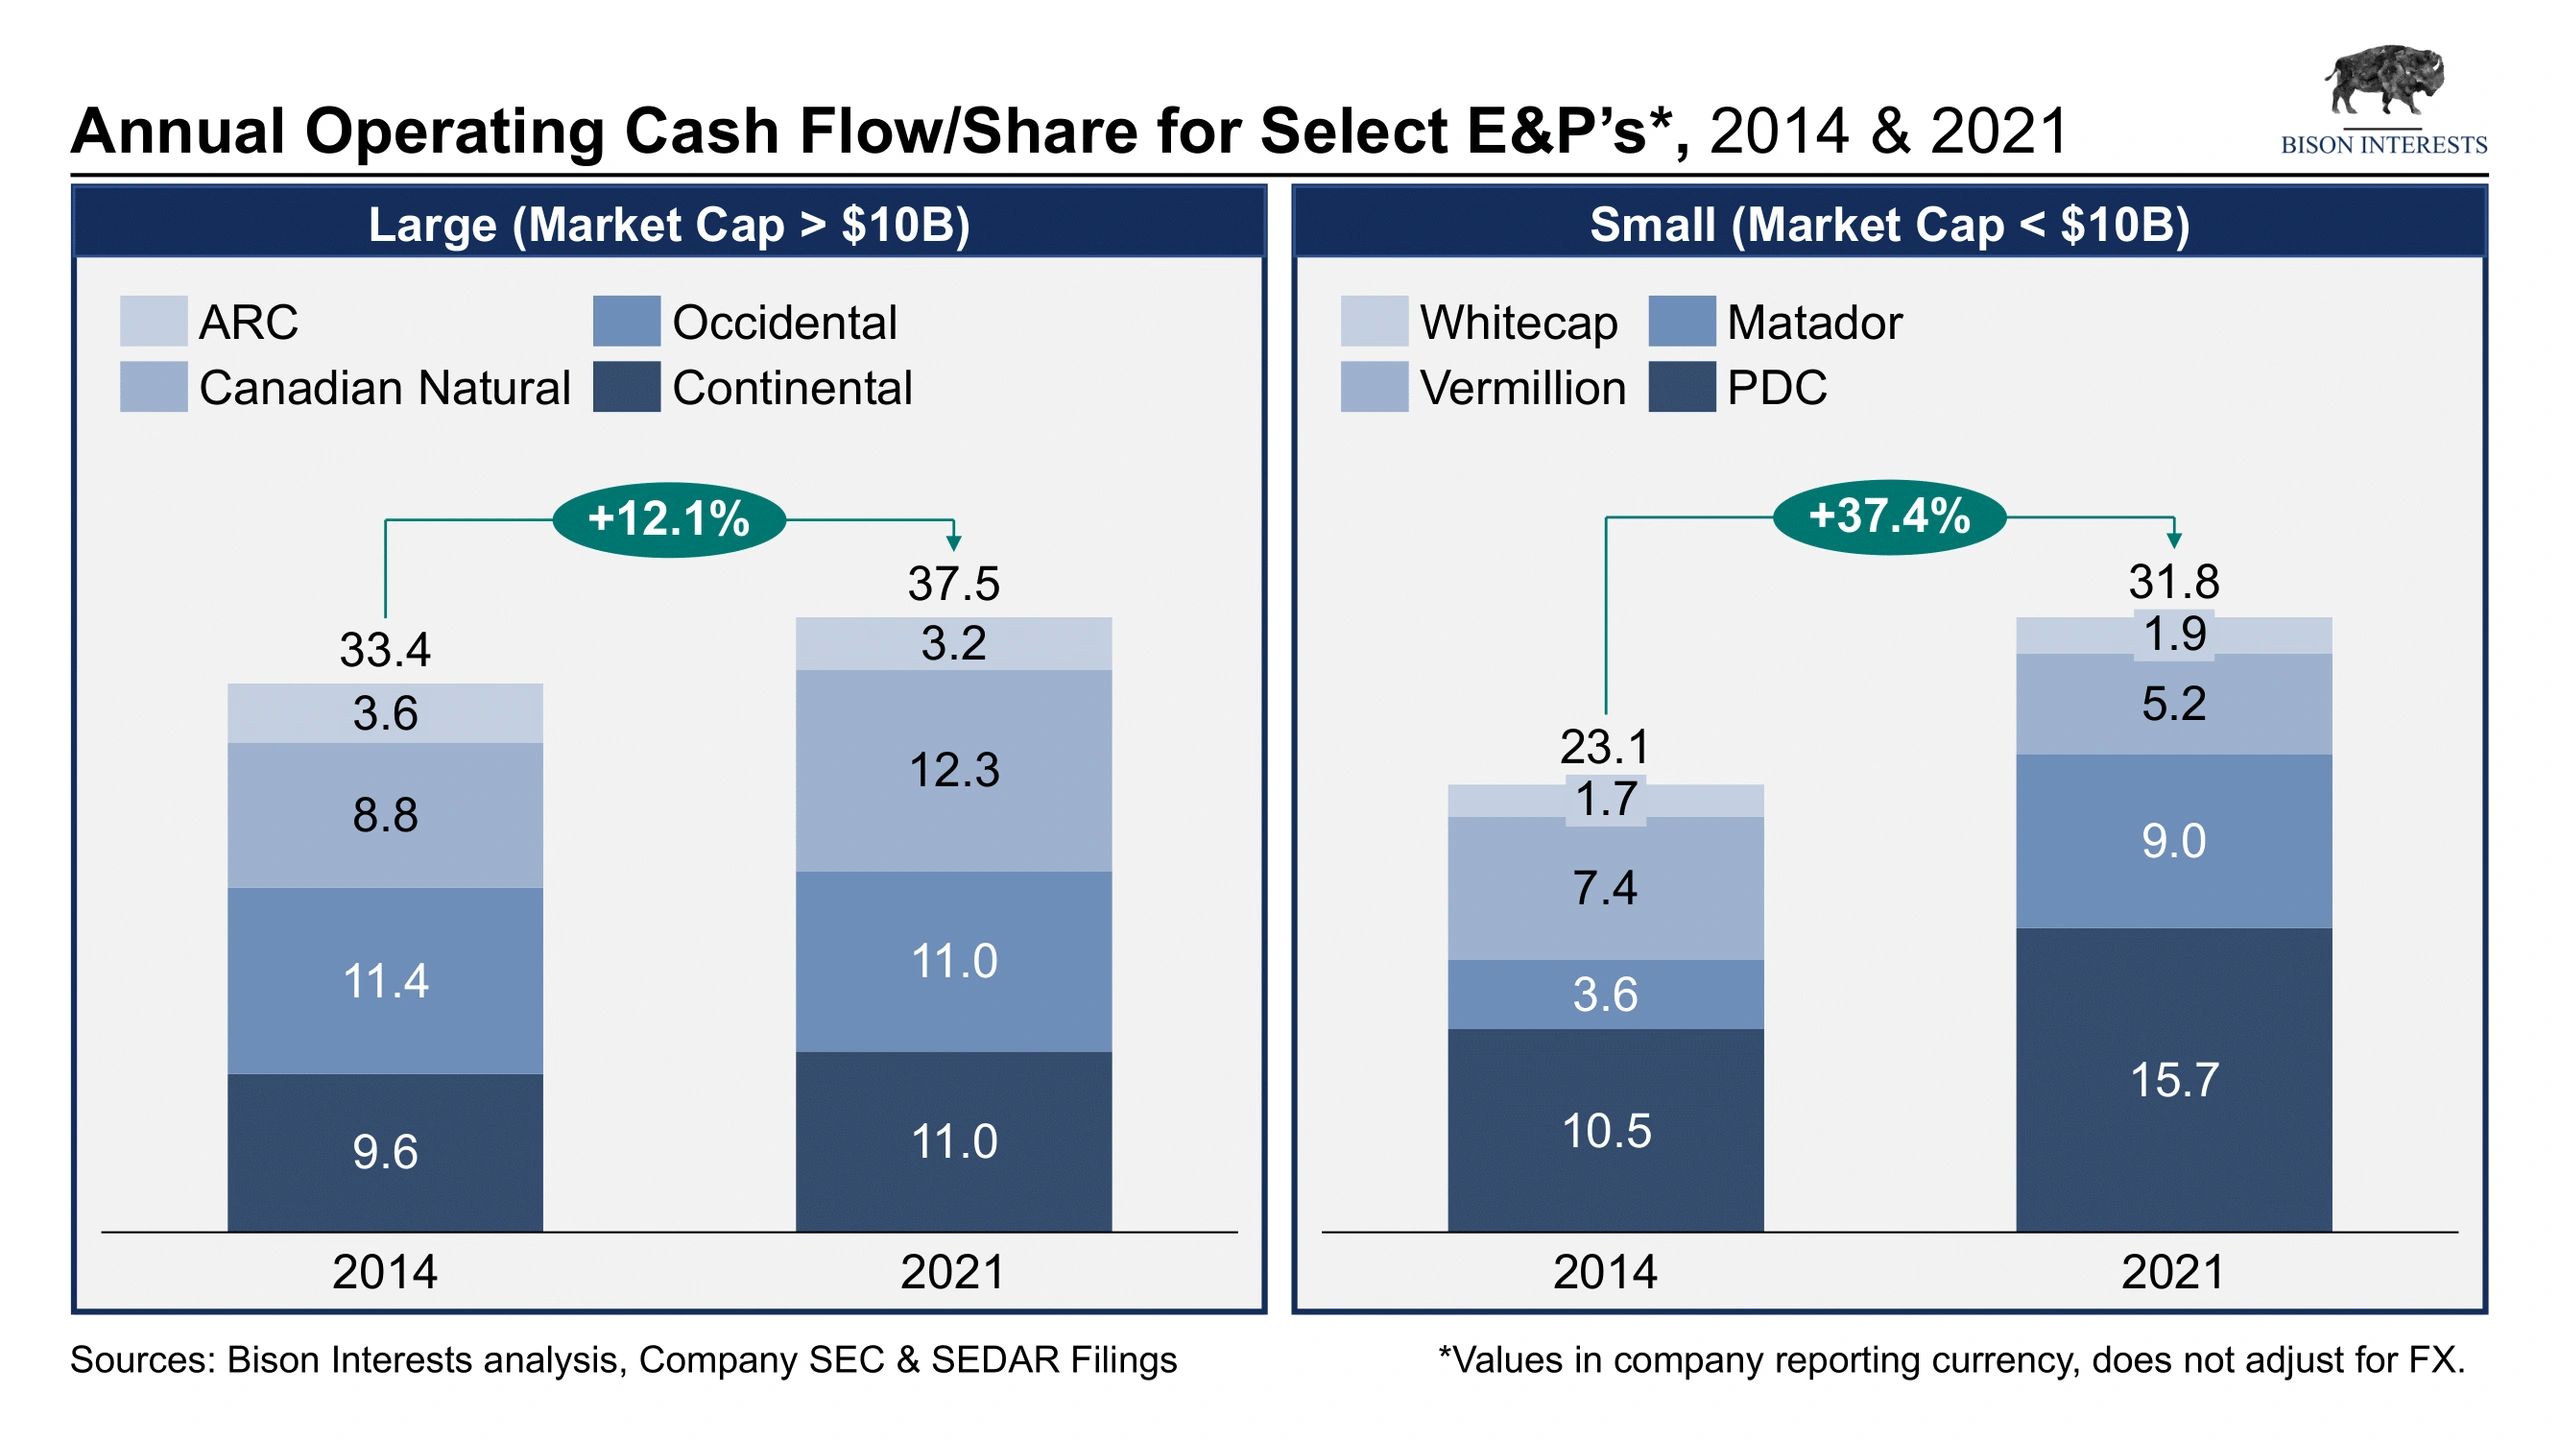 Small-Cap E&Ps: Compelling Opportunity